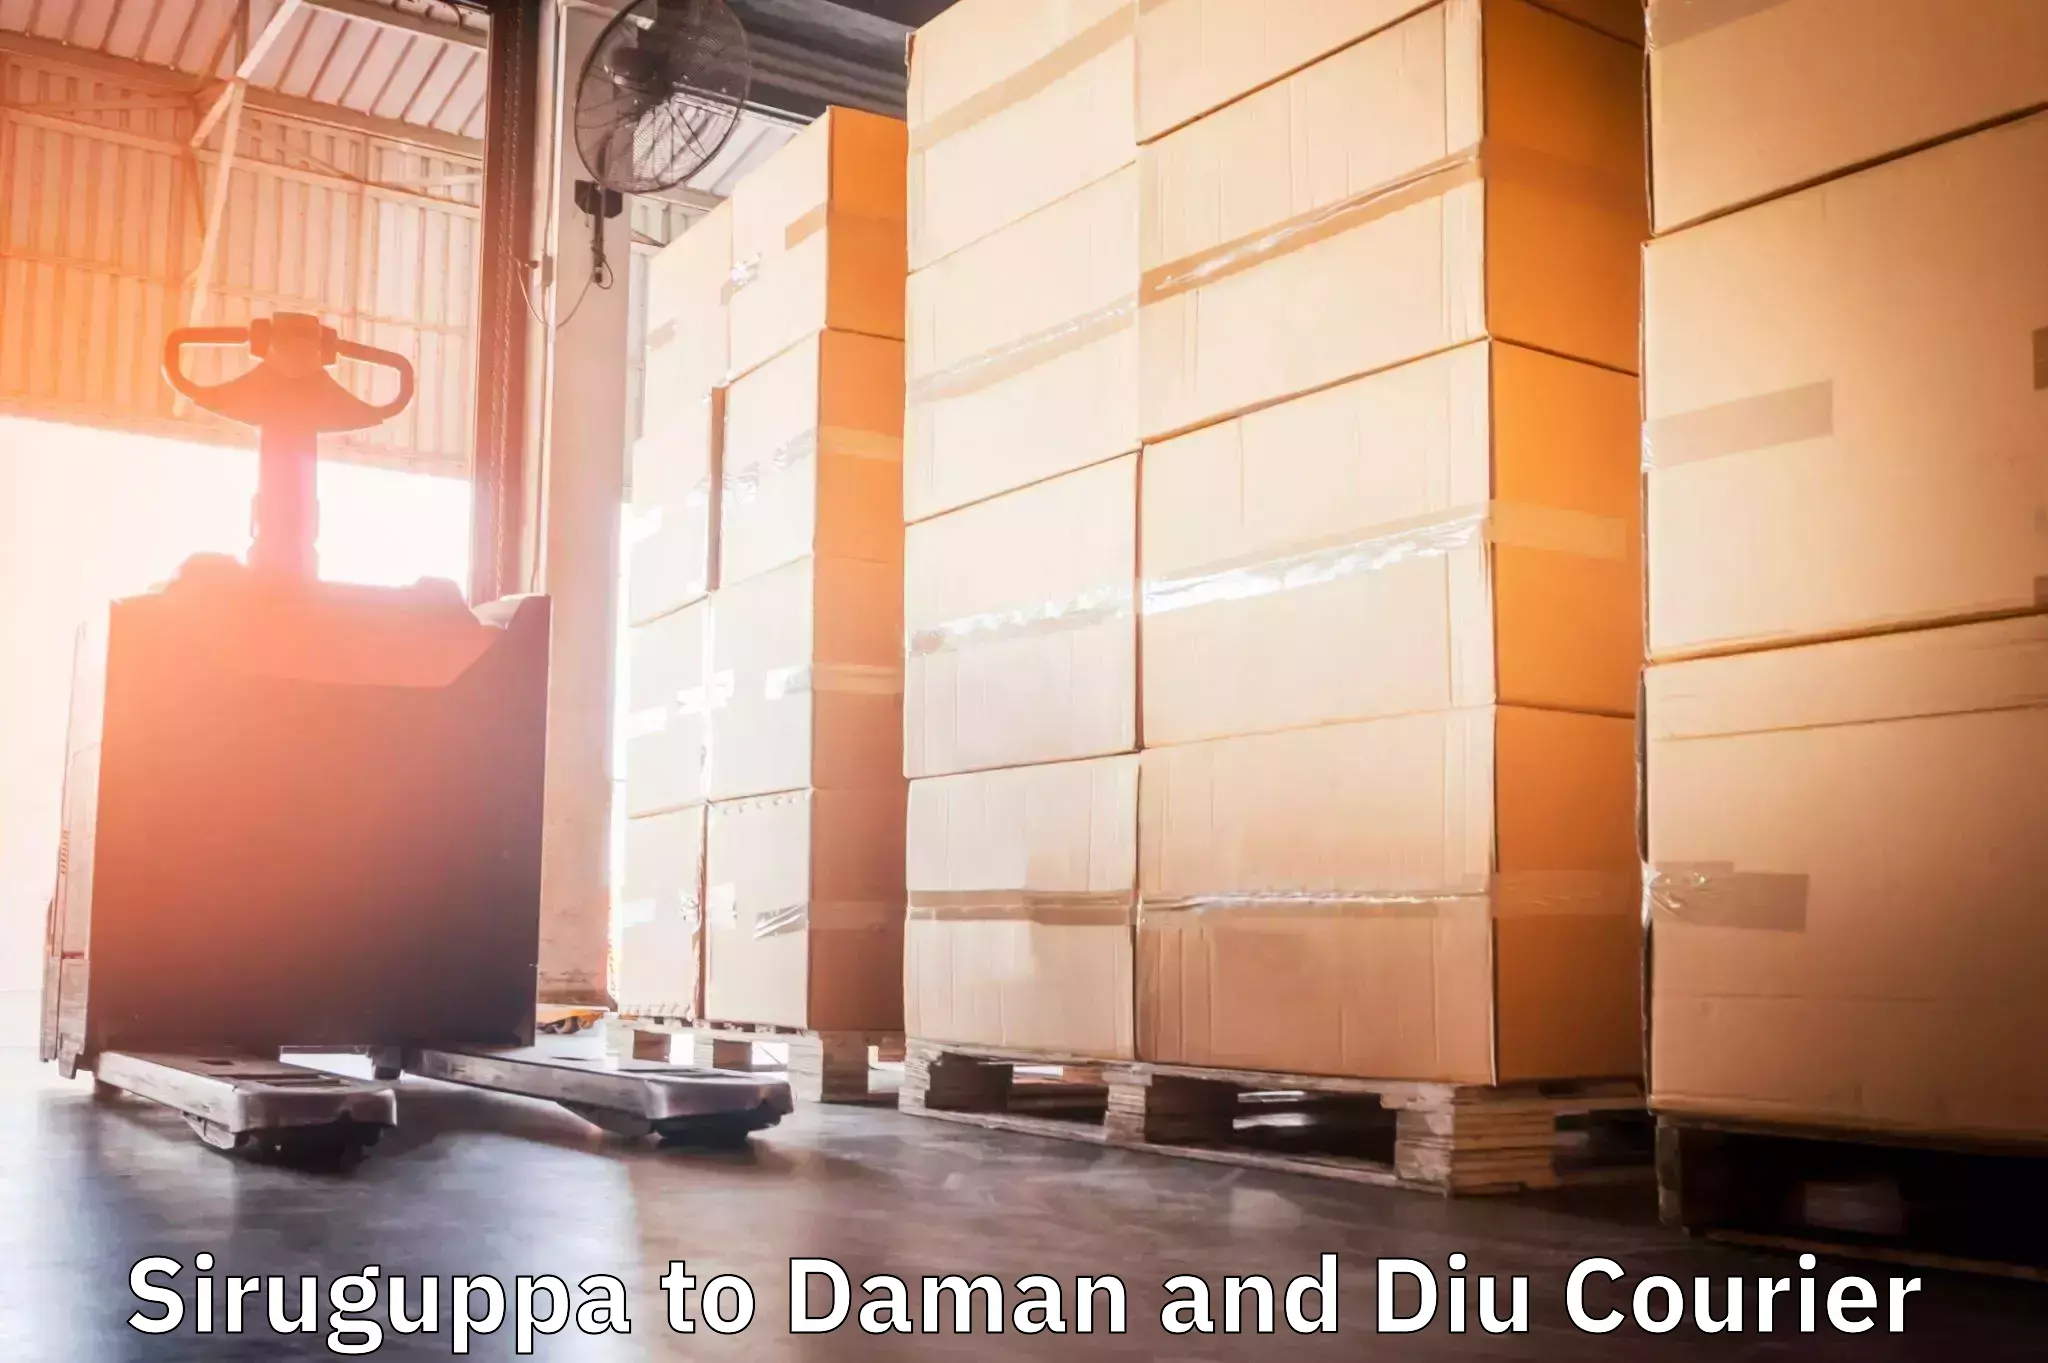 Flexible delivery scheduling Siruguppa to Daman and Diu